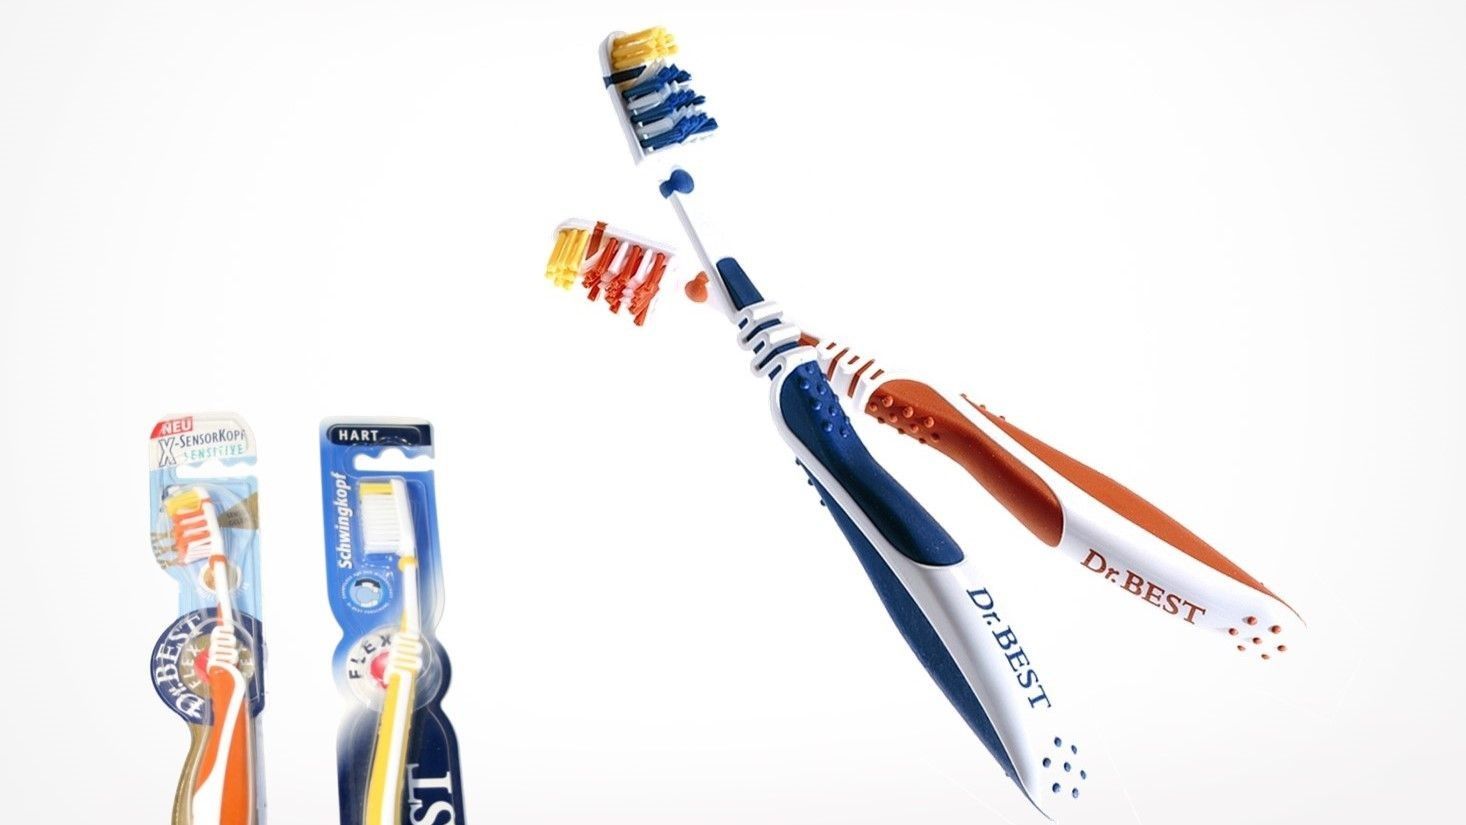 Dr. Best toothbrushes in blue and red with and without packaging